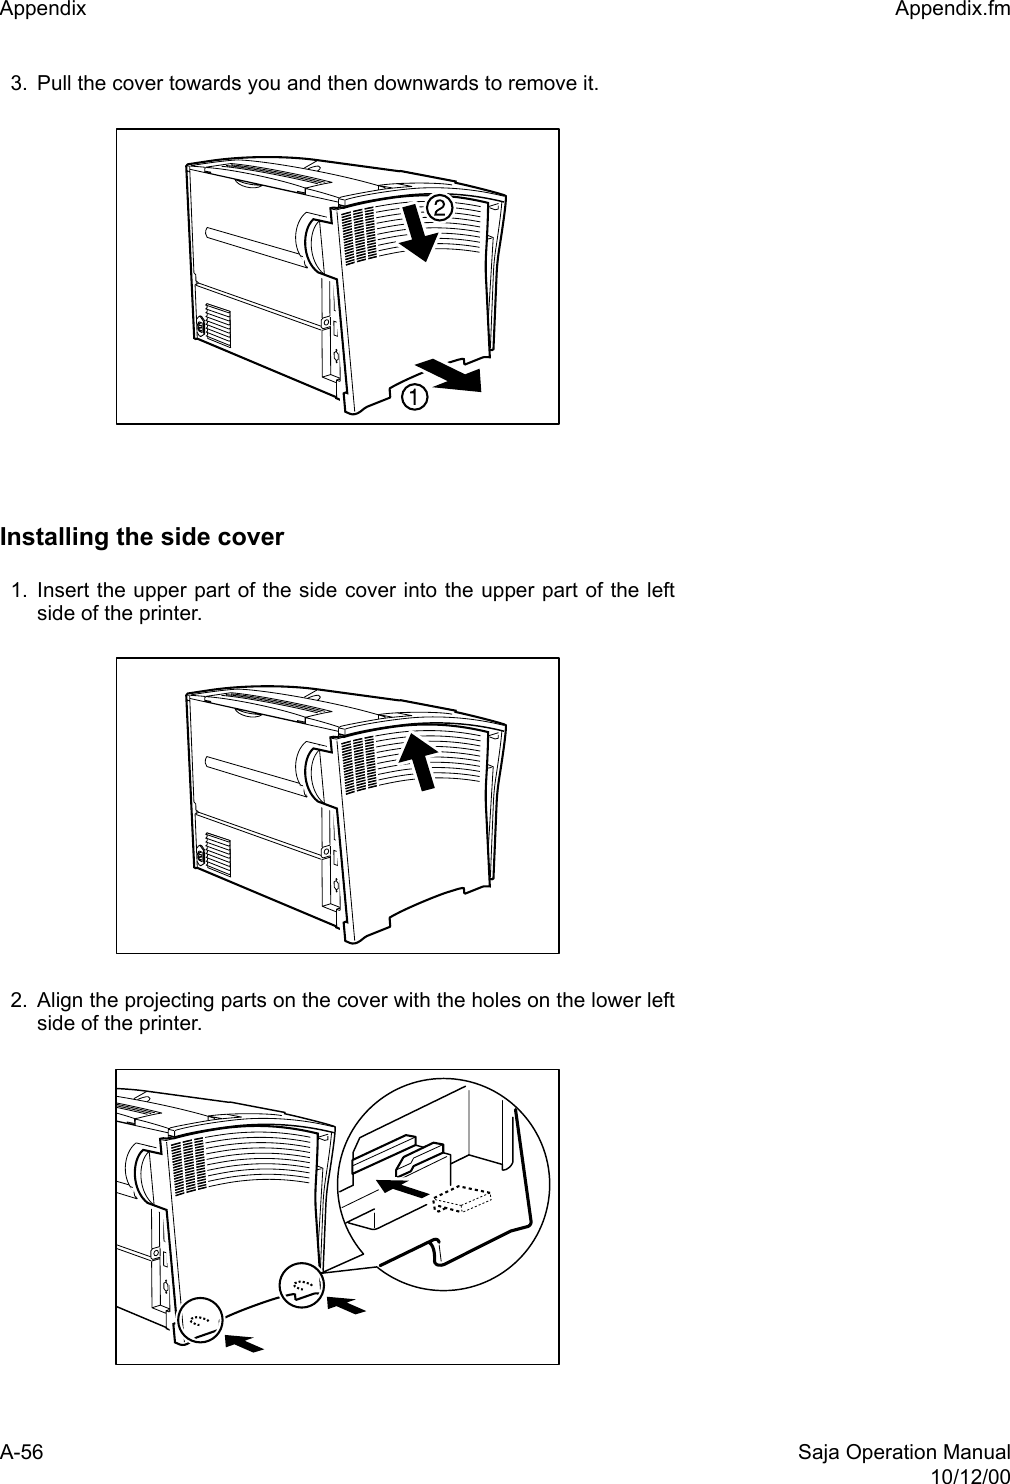 A-56 Saja Operation Manual10/12/00Appendix  Appendix.fm3. Pull the cover towards you and then downwards to remove it.Installing the side cover1. Insert the upper part of the side cover into the upper part of the leftside of the printer.2. Align the projecting parts on the cover with the holes on the lower leftside of the printer.